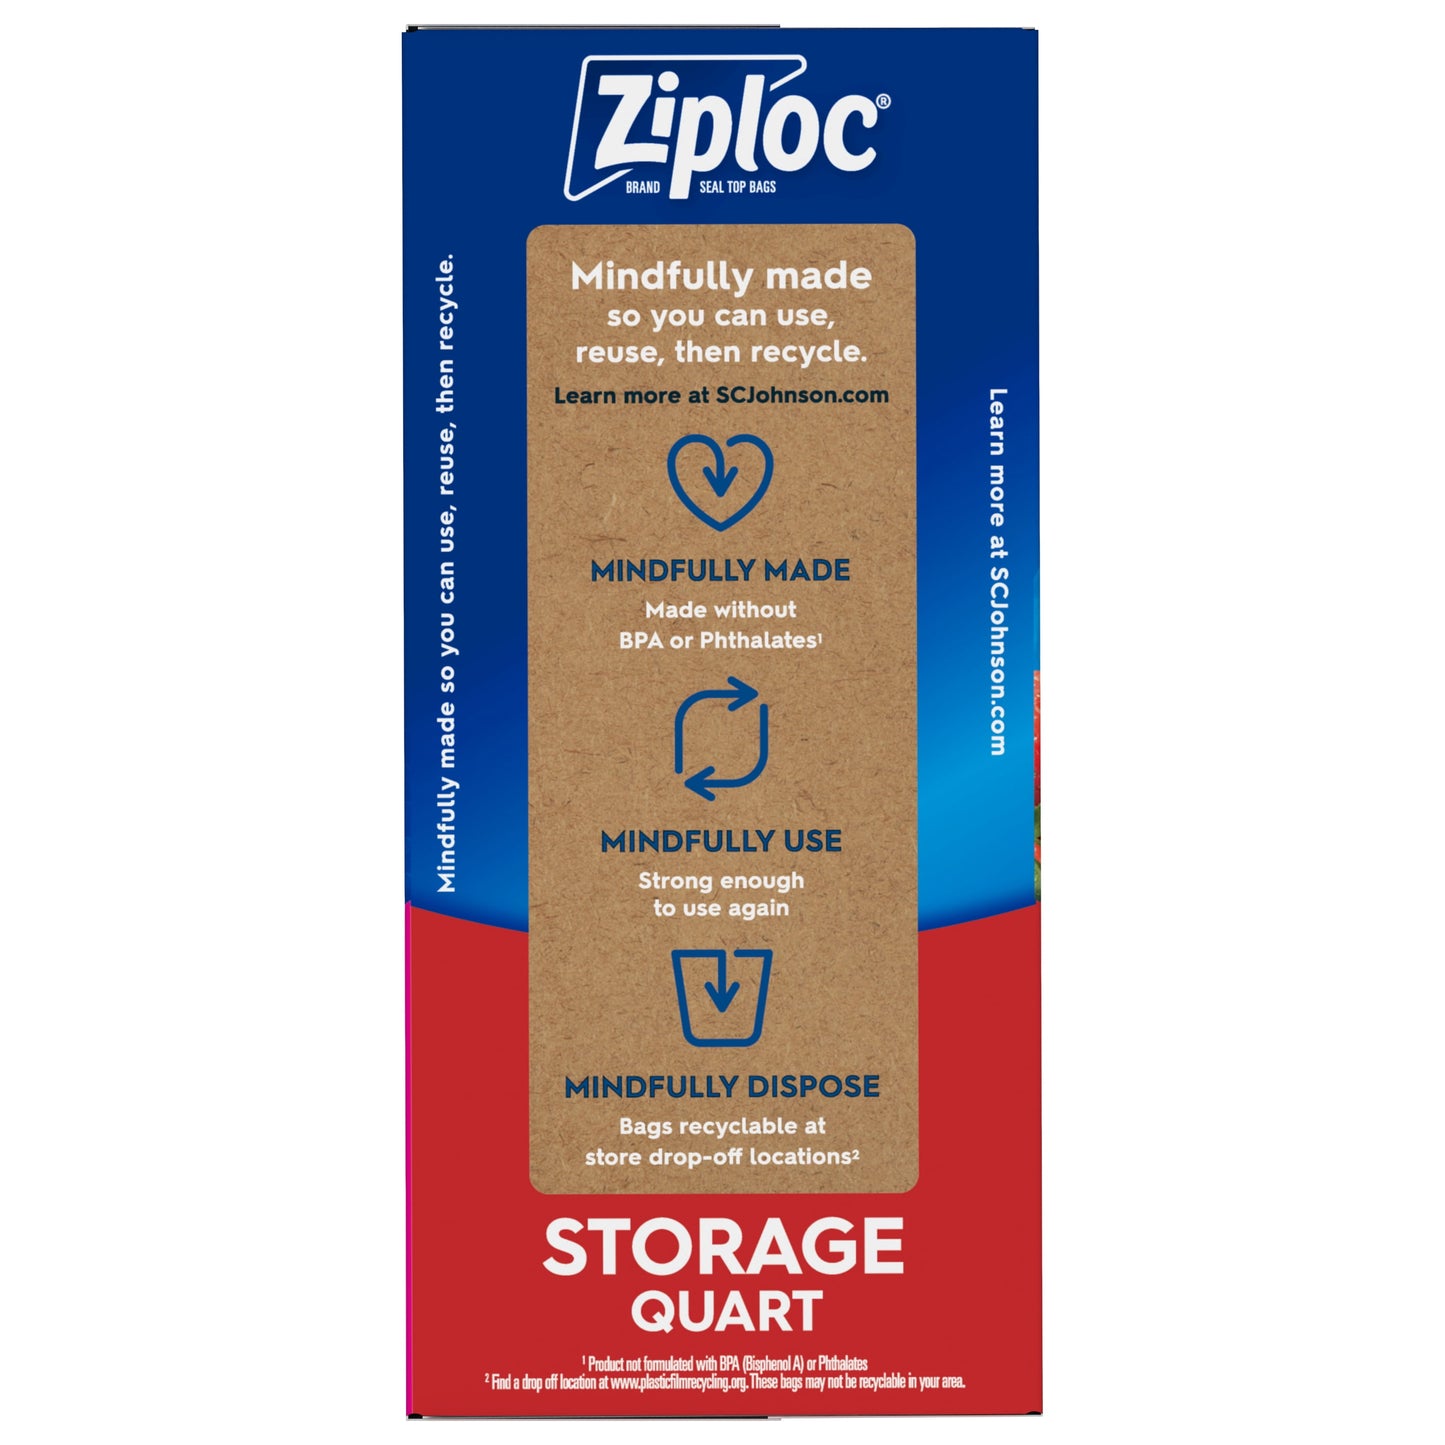 Ziploc® Brand Storage Bags with New Stay Open Design, Quart, 75 Count, Patented Stand-up Bottom, Easy to Fill Food Storage Bags, Unloc a Free Set of Hands in the Kitchen, Microwave Safe, BPA Free